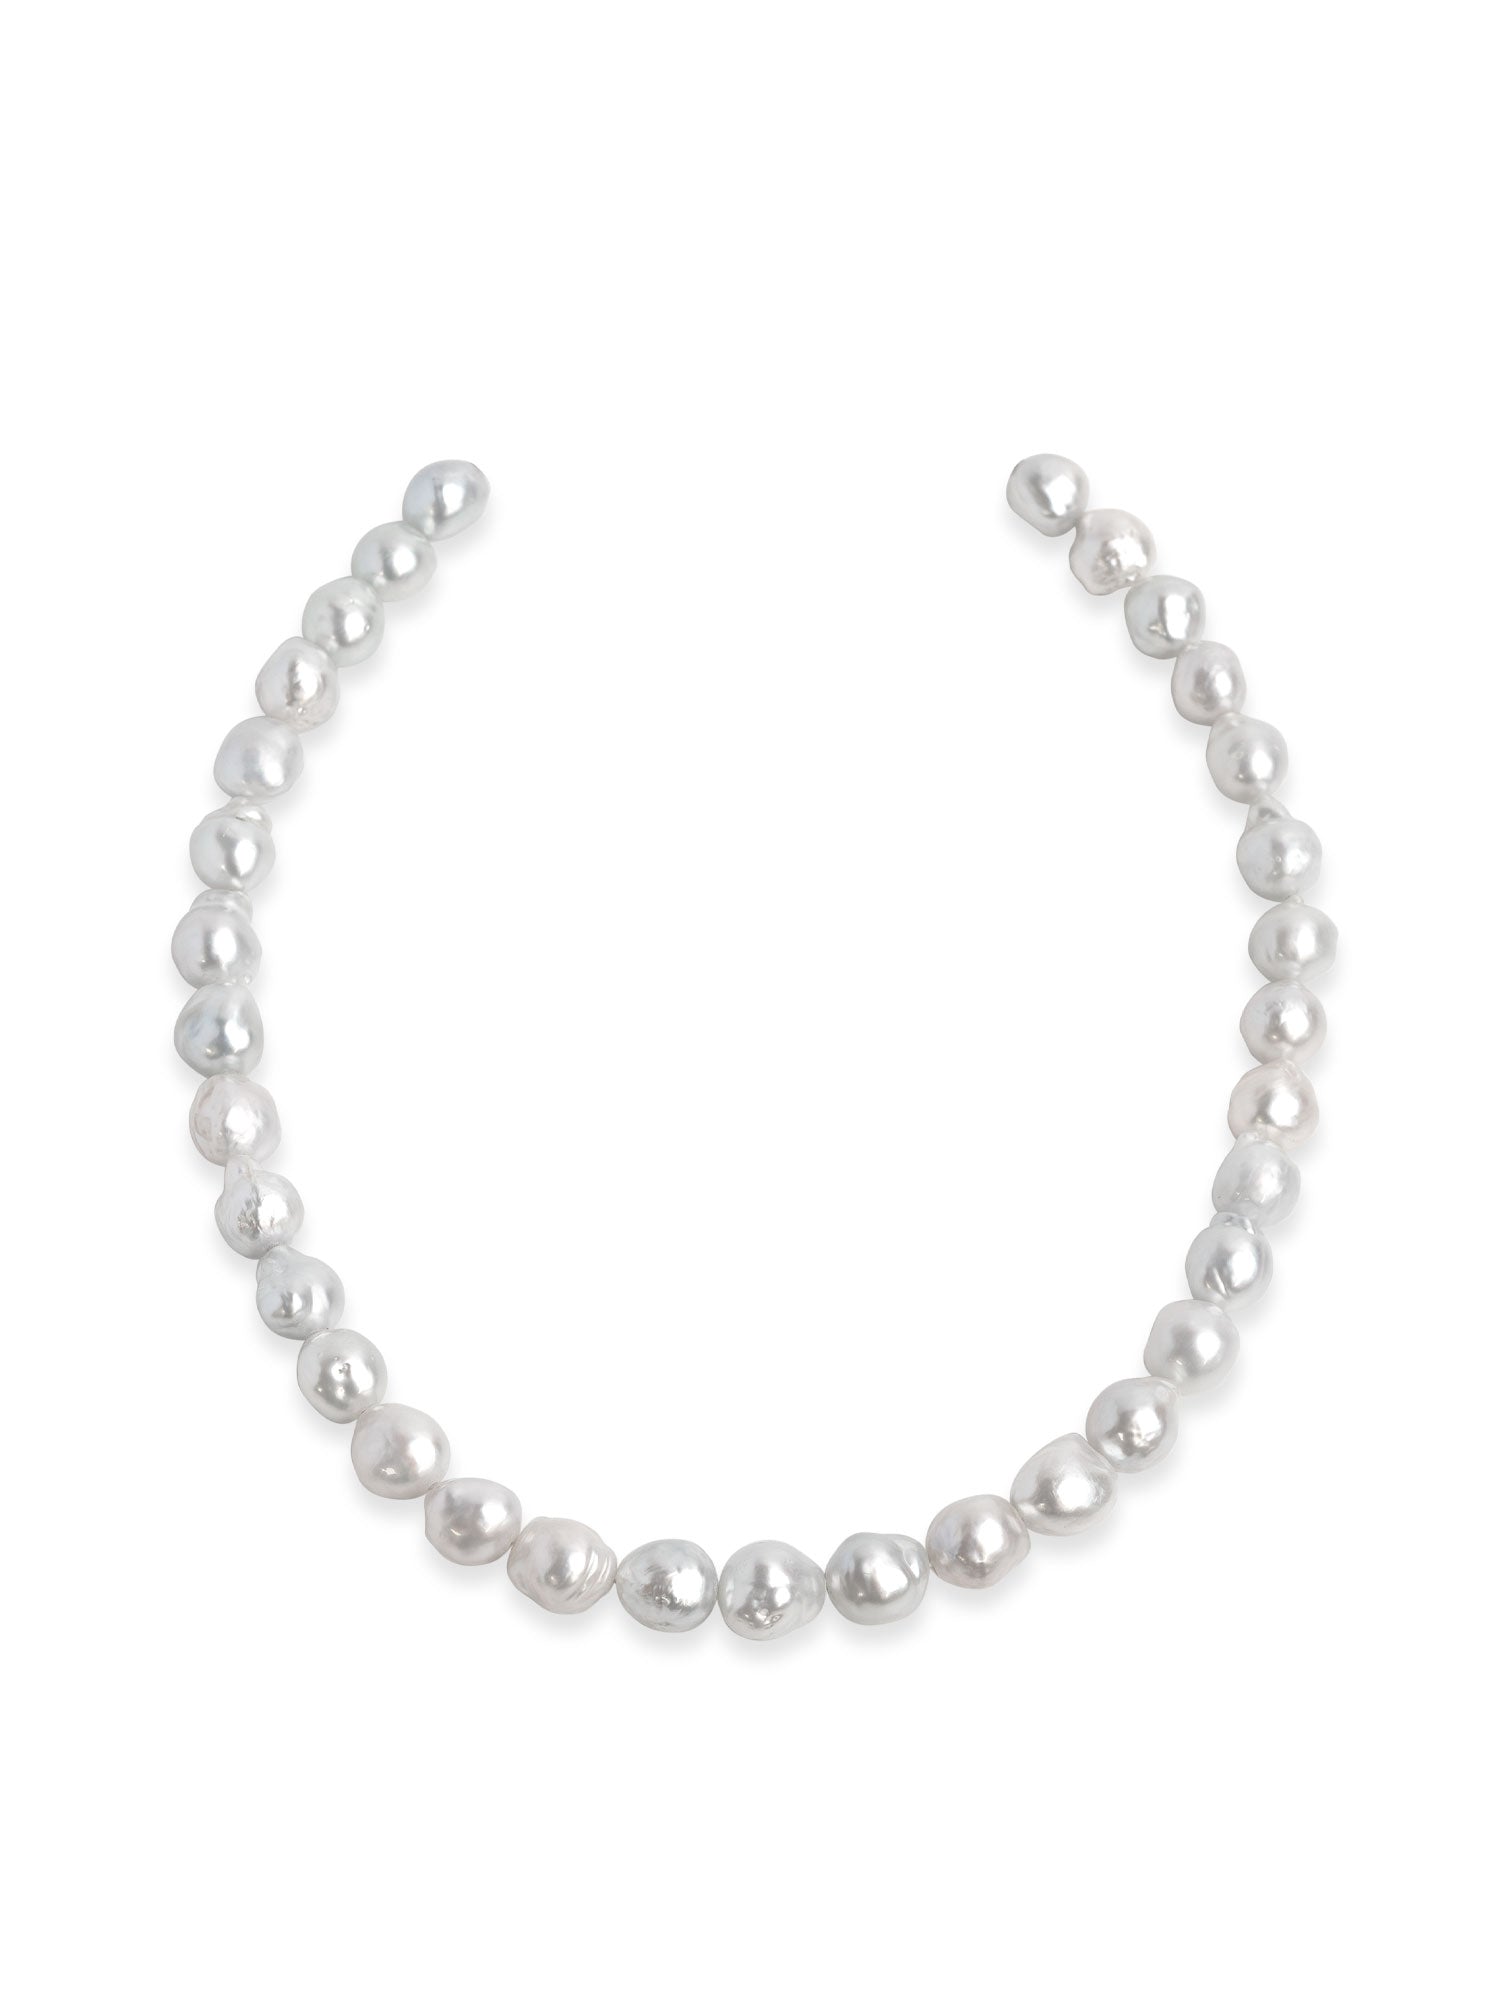 PEARL NECKLACE, cultured pearls, clasp in 18k white gold, blue